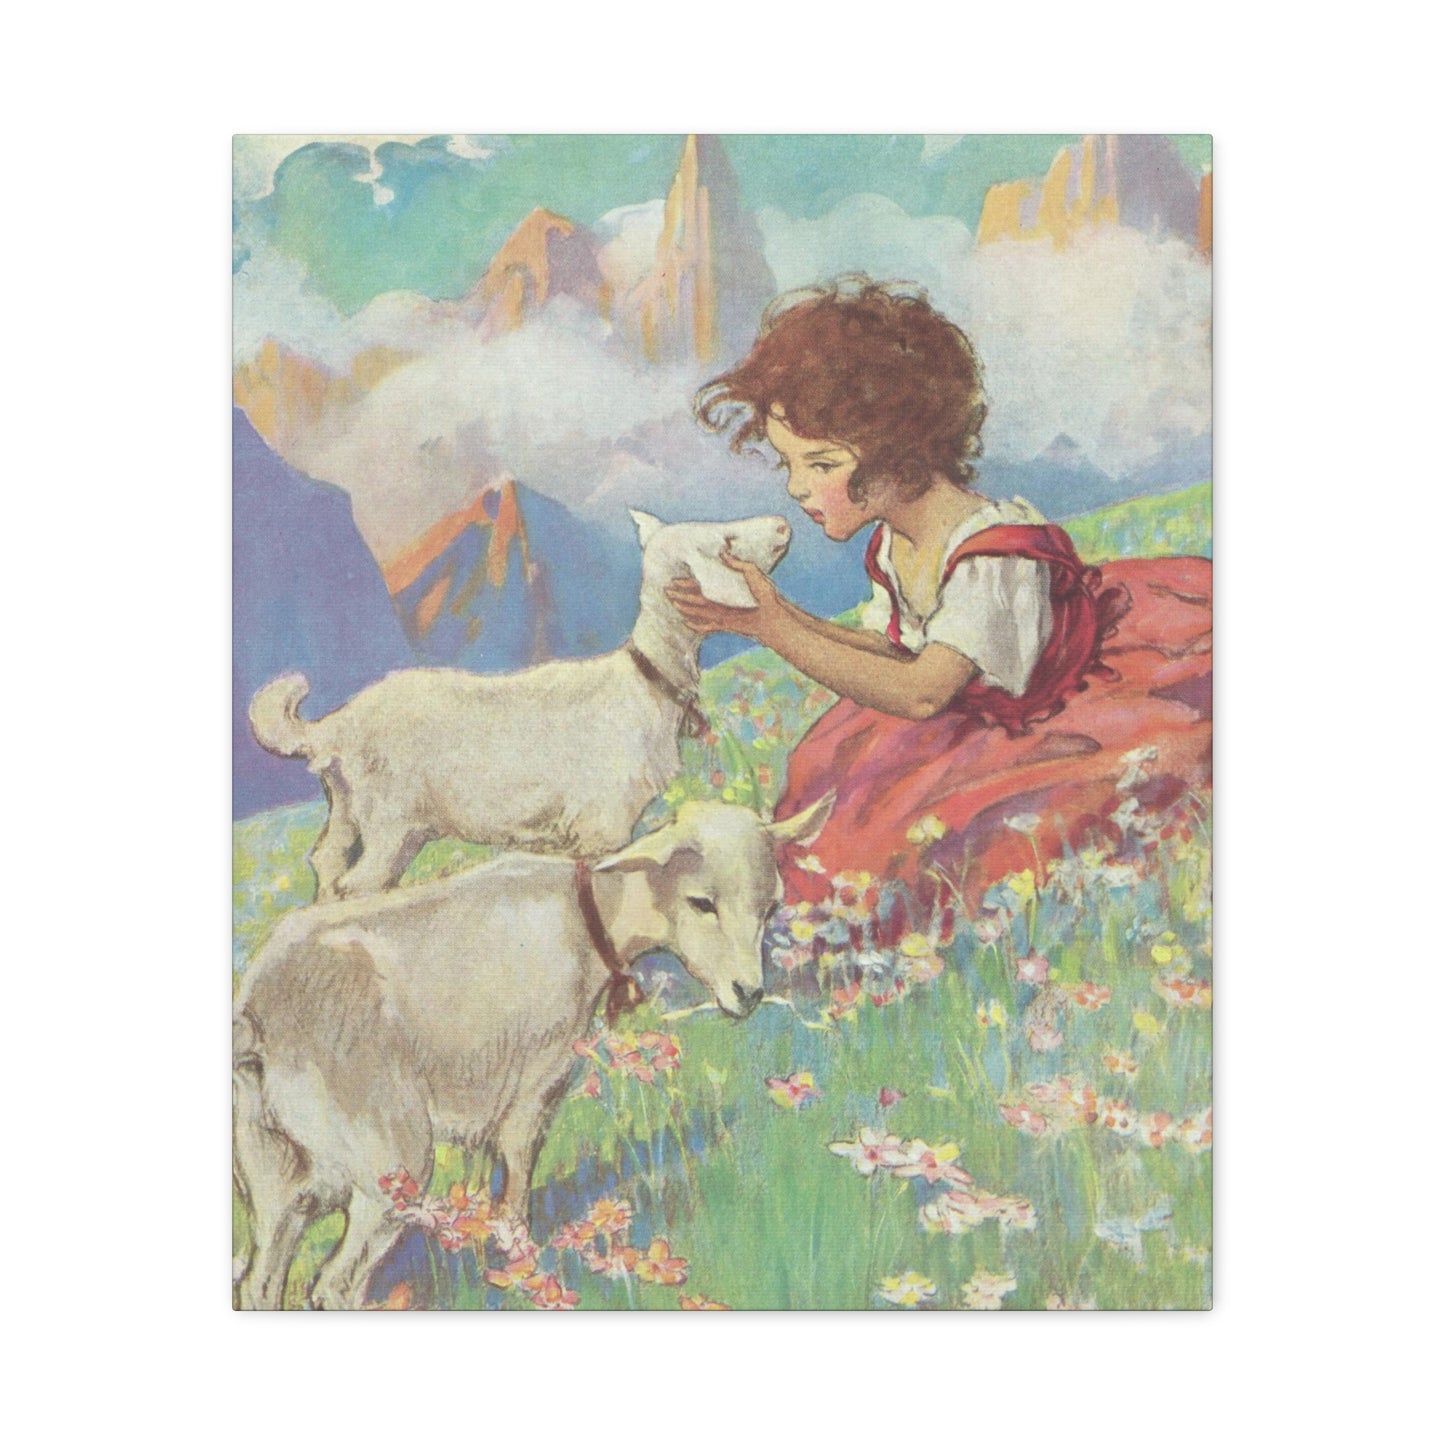 Vintage 1904 "Heidi and Friends" Canvas Print, Pastoral Alpine Scene with Child and Goats-CropsyPix